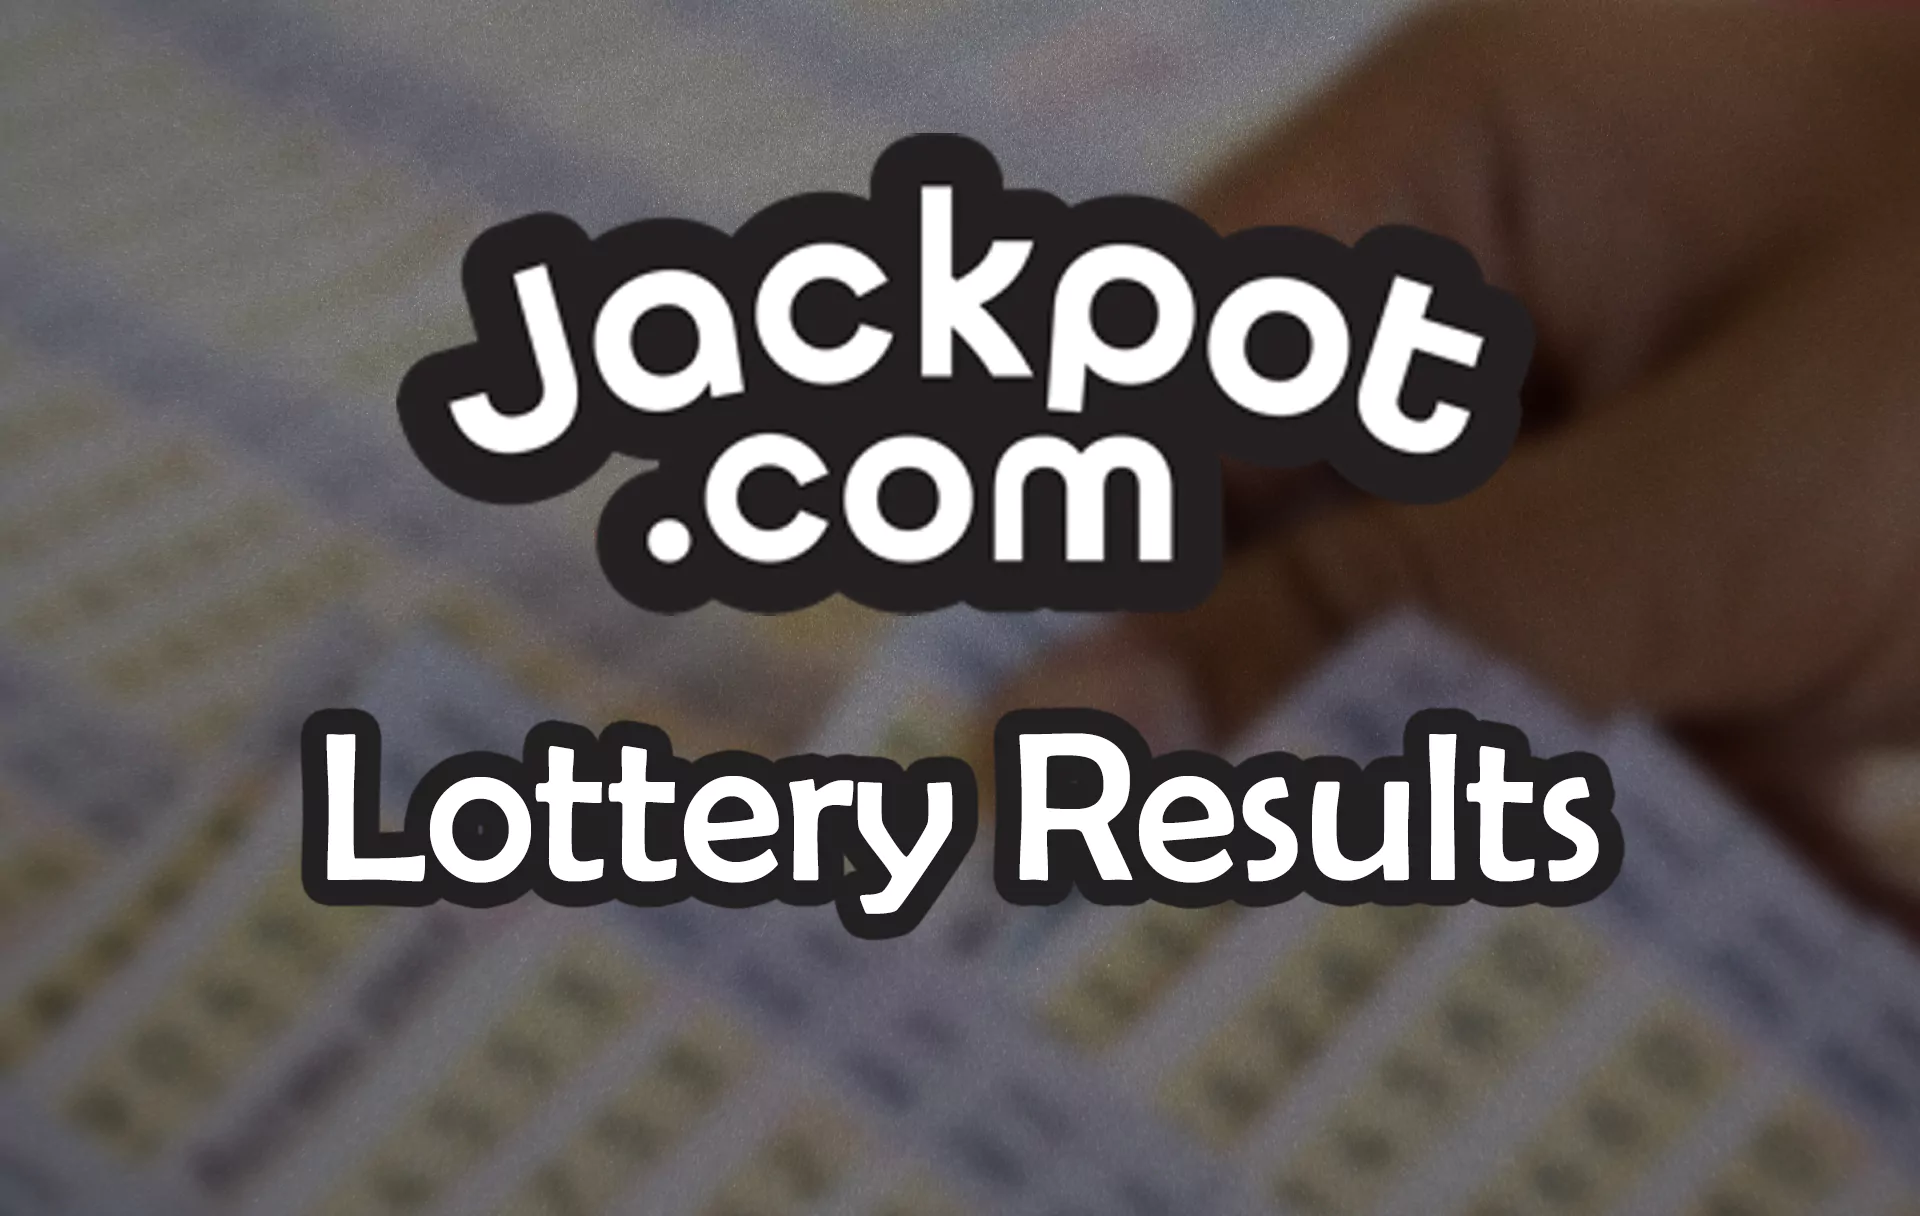 After the lottery is provided don't forget to check the results.